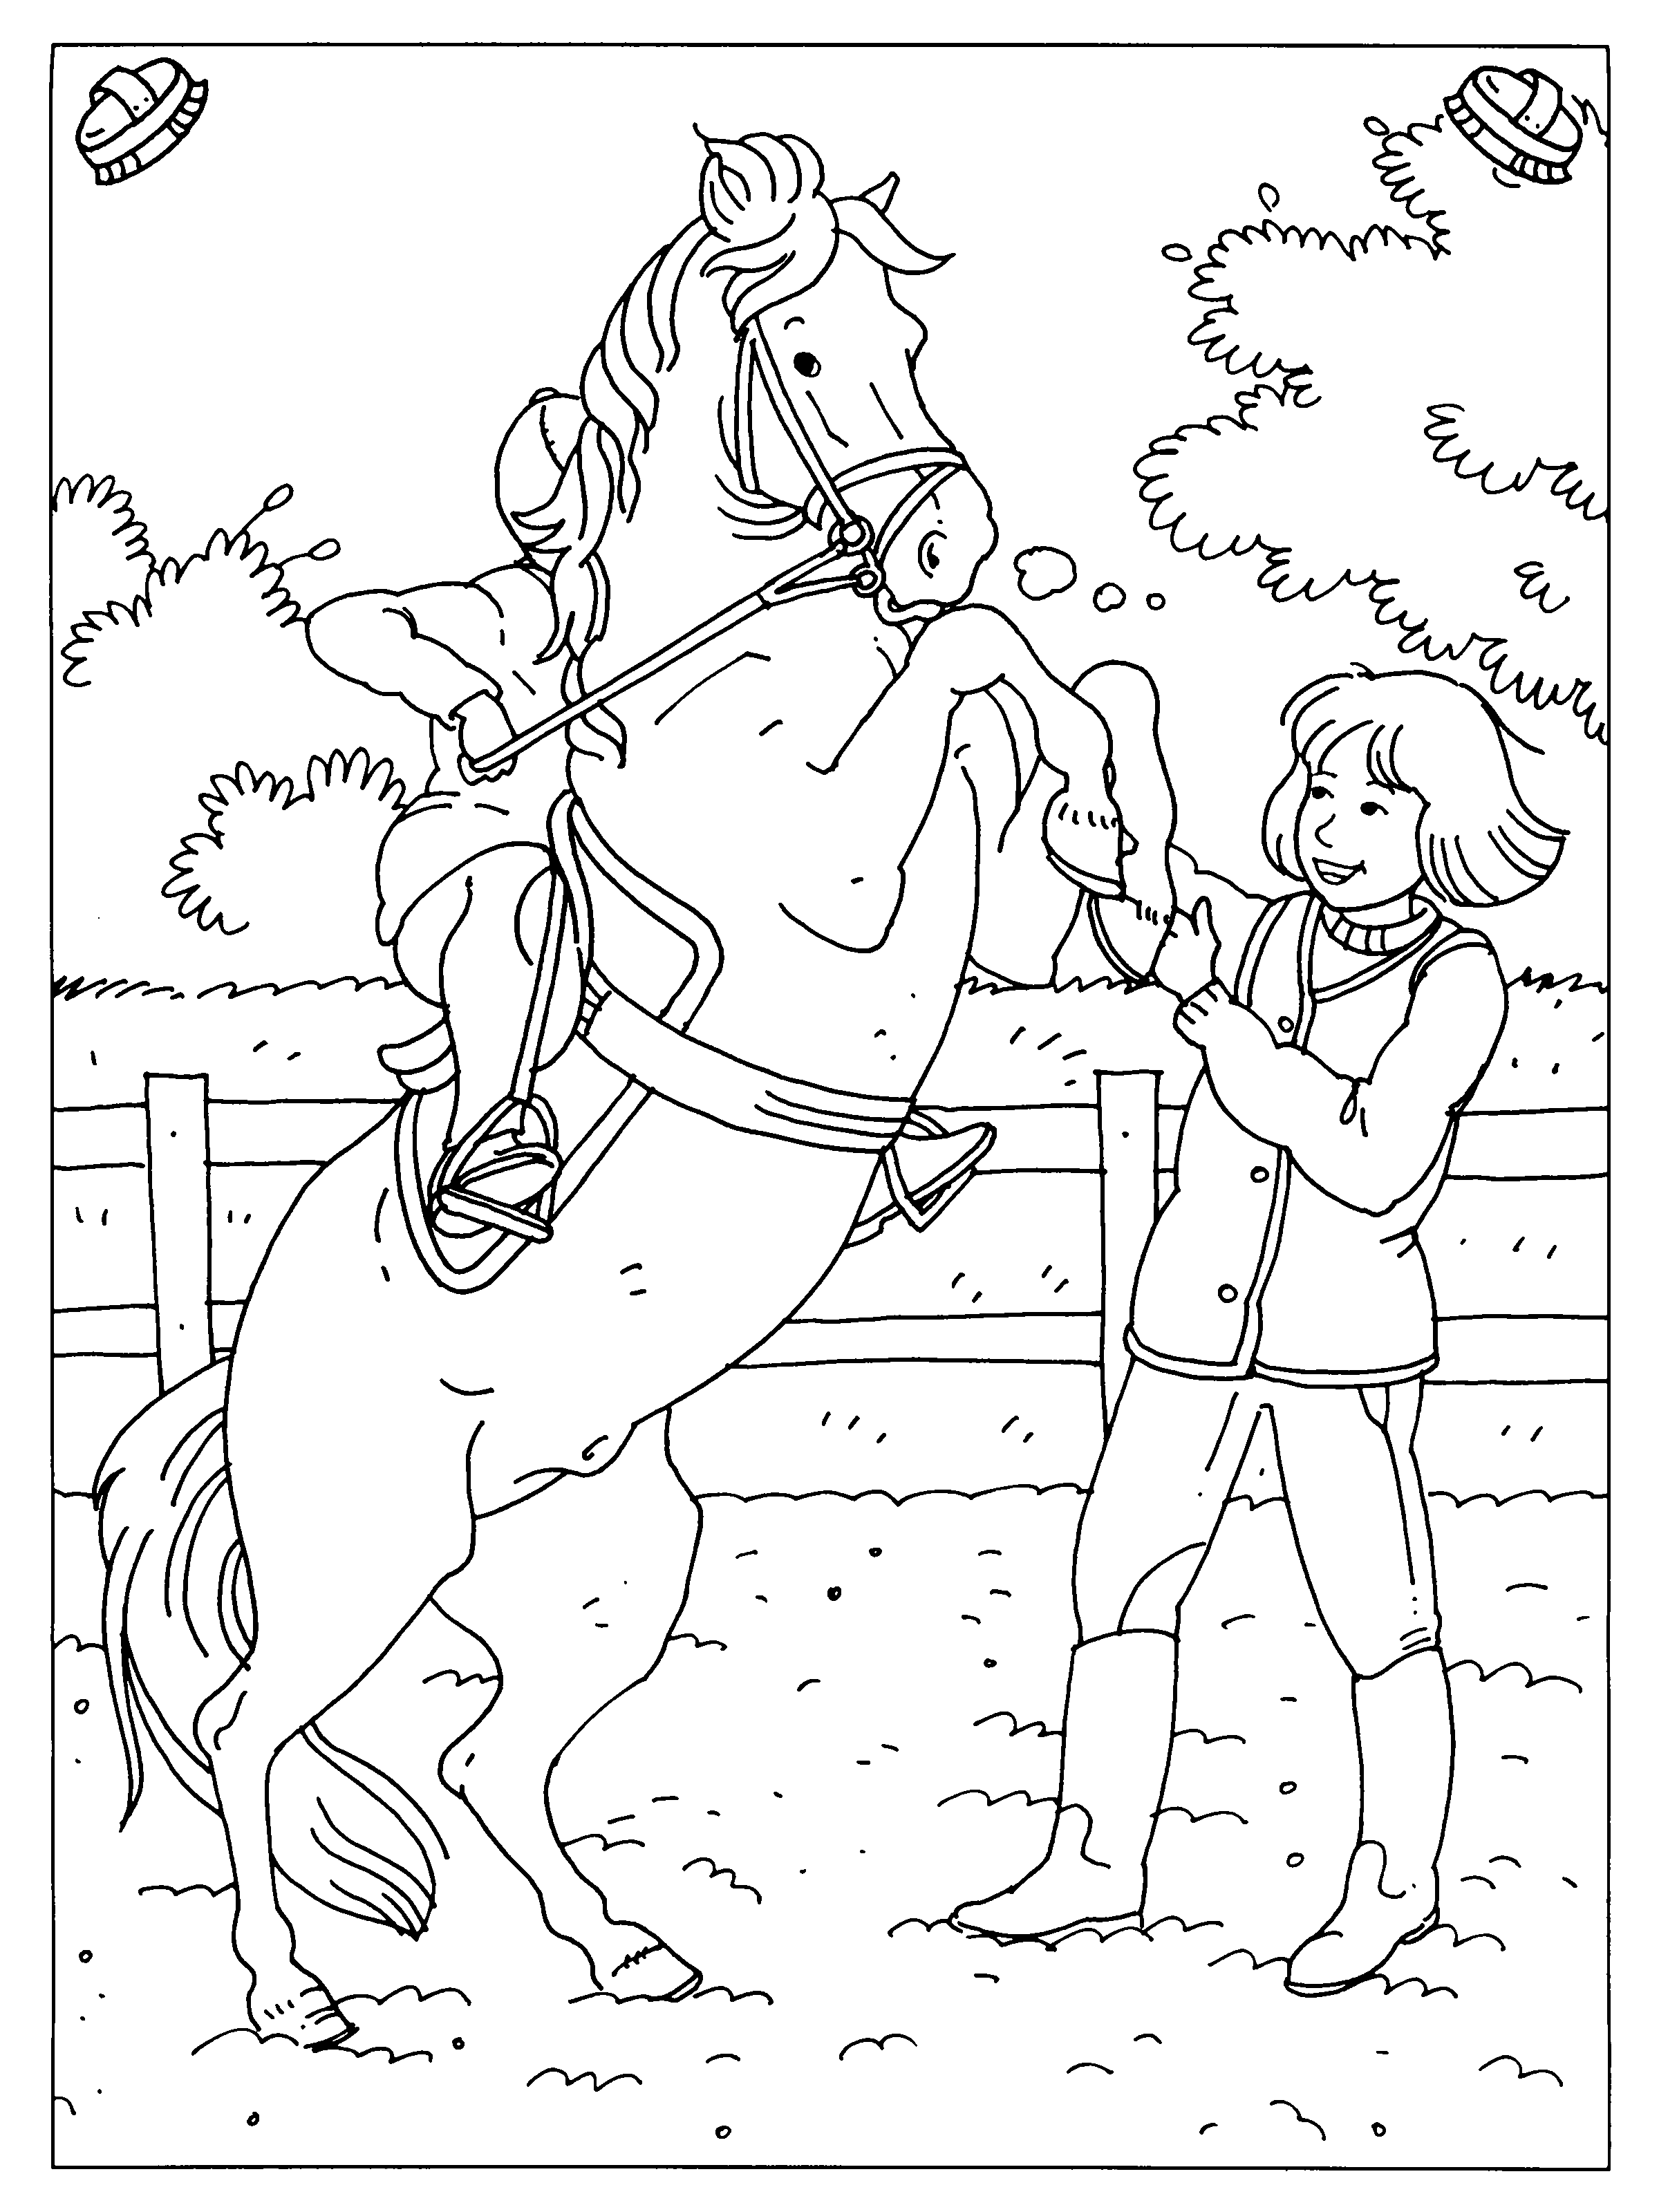 Paard 01 16 Png 2400 3200 Horse Coloring Pages Horse Coloring Coloring Pages